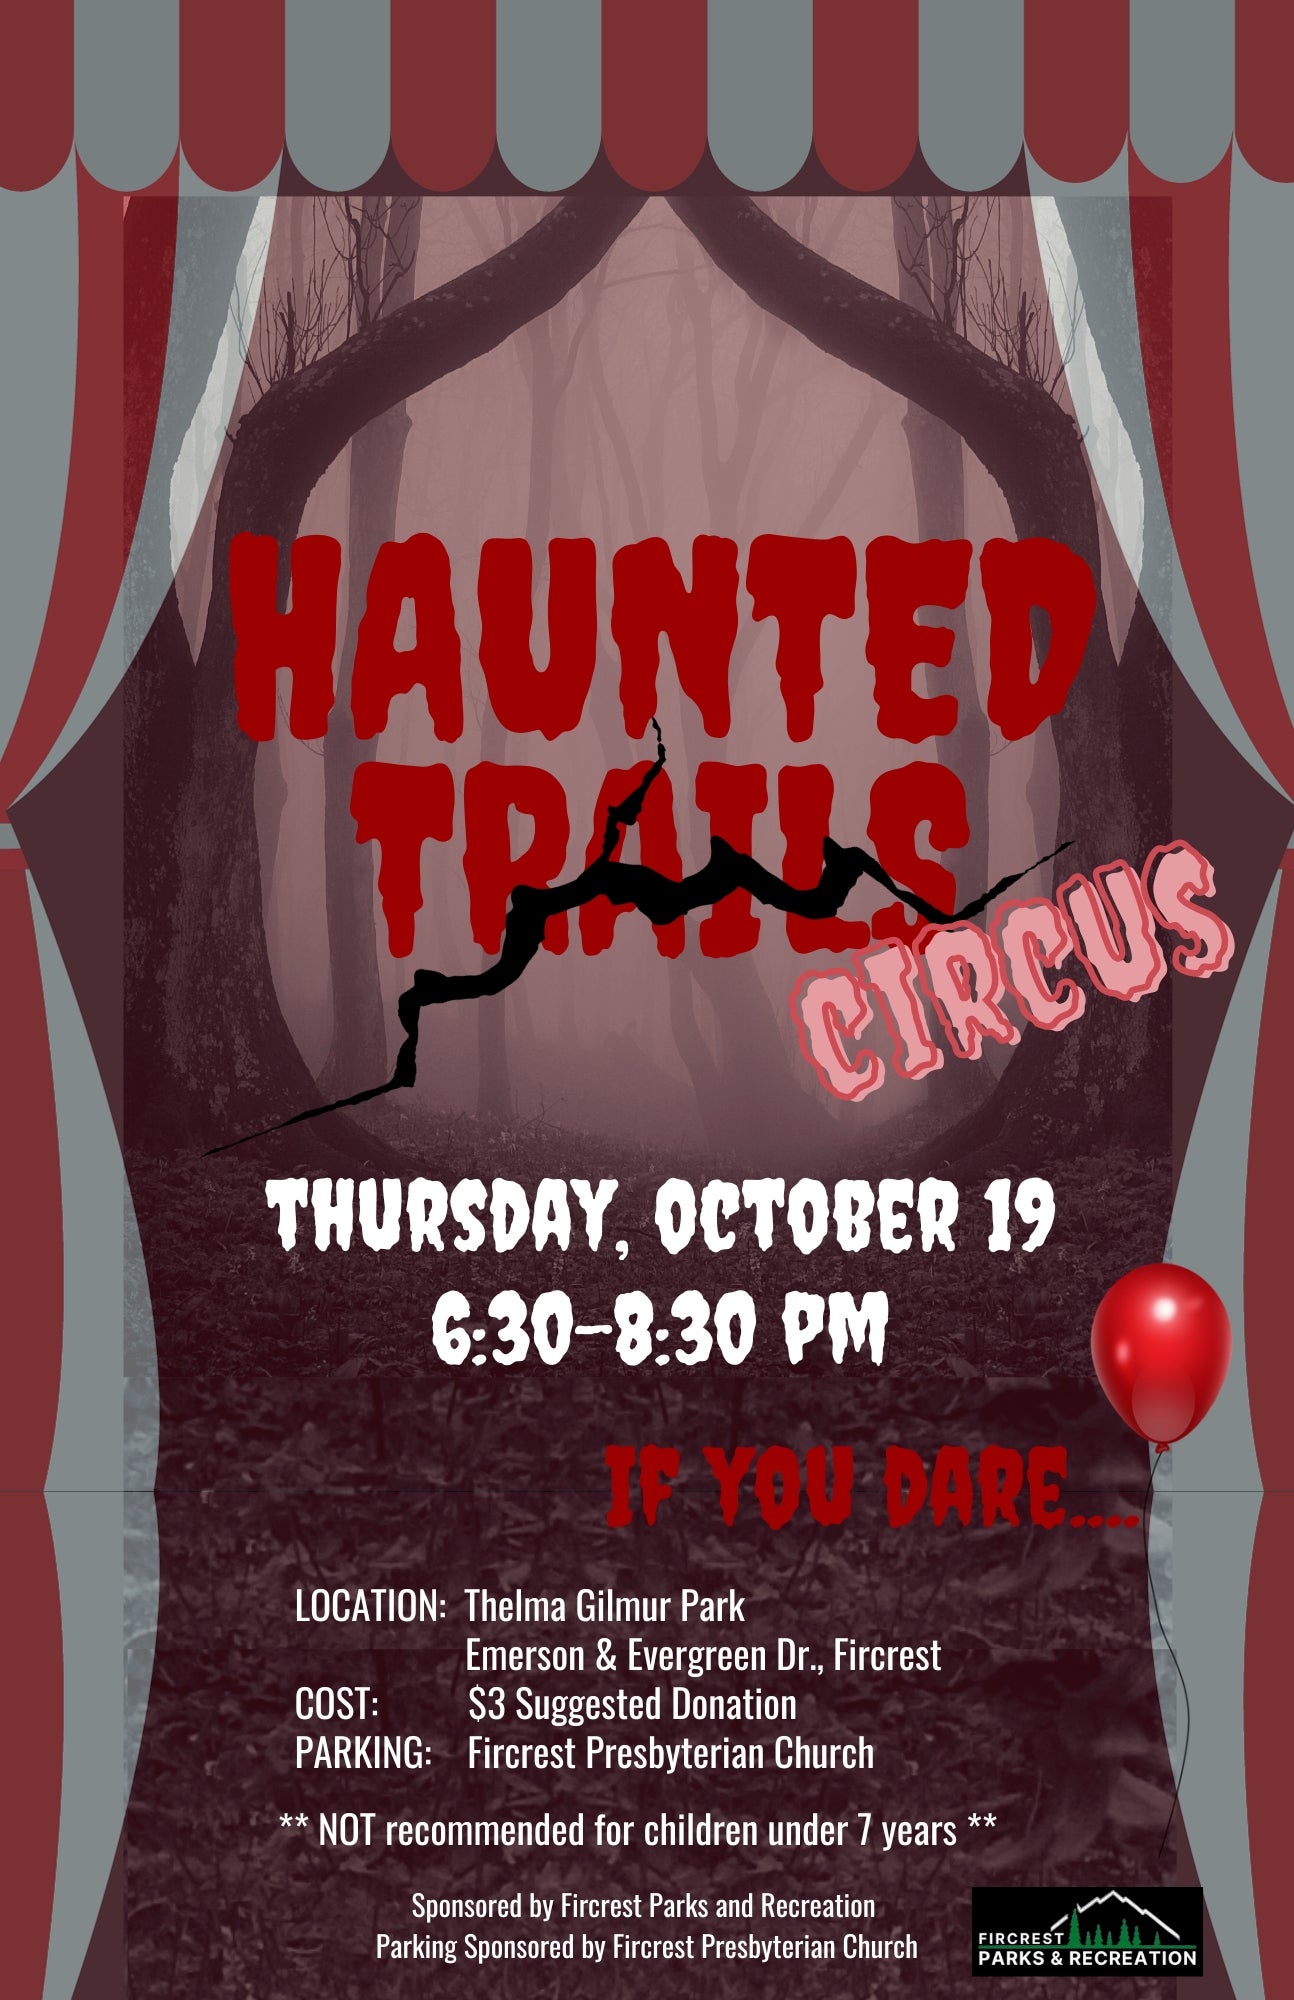 Haunted Trails poster with a circus tent border creepy trees making a pathway in the background and text that reads Haunted Trails with a crack through trails and circus hung next to it. Other text reads Thursday, October 19th 6:30-8:30PM. IF you Dare. with location information (as described below the image)